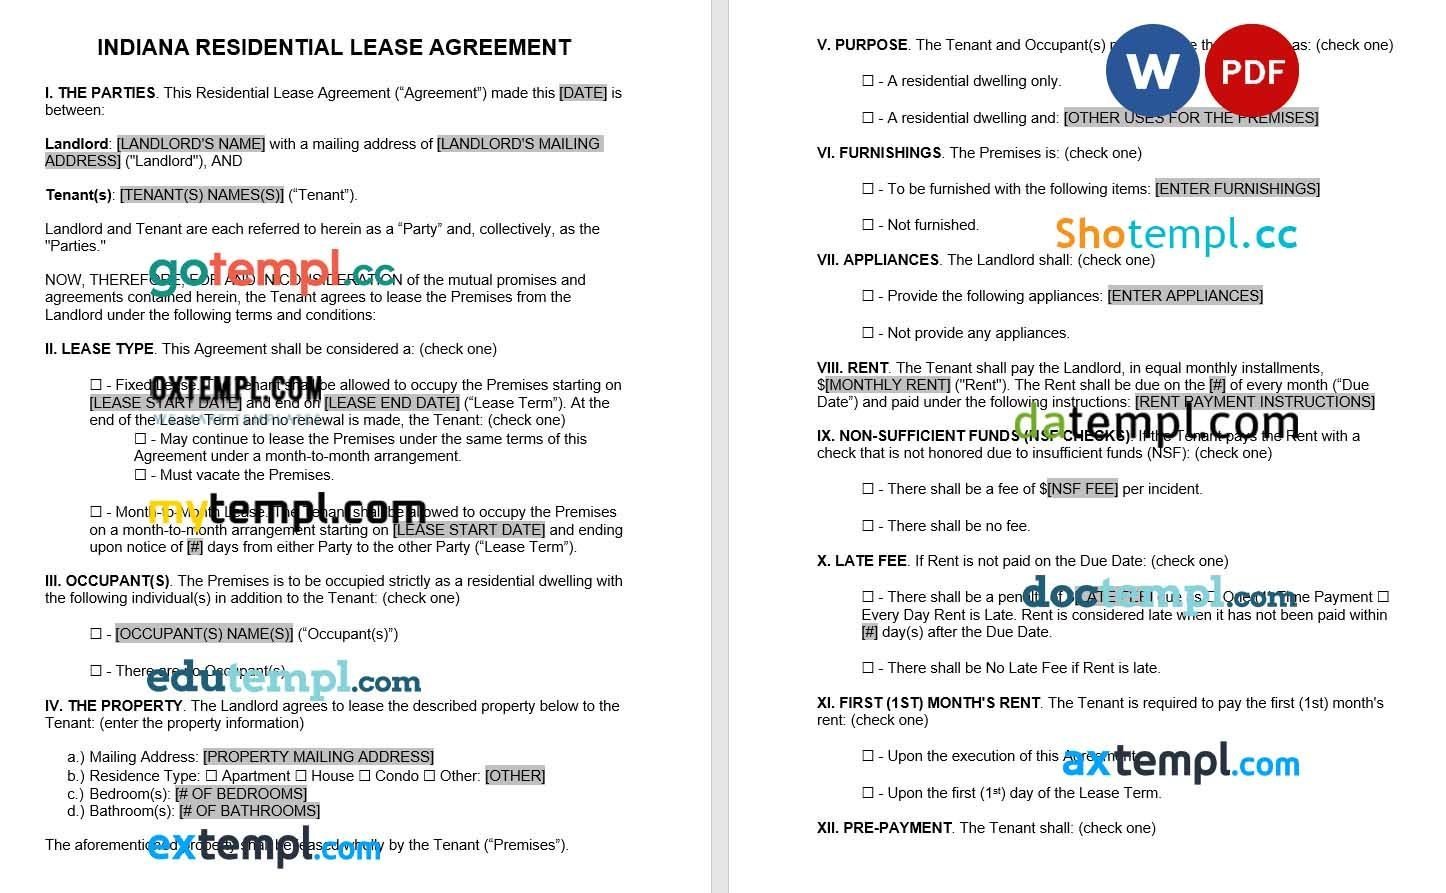 Indiana Standard Residential Lease Agreement Word example, fully editable